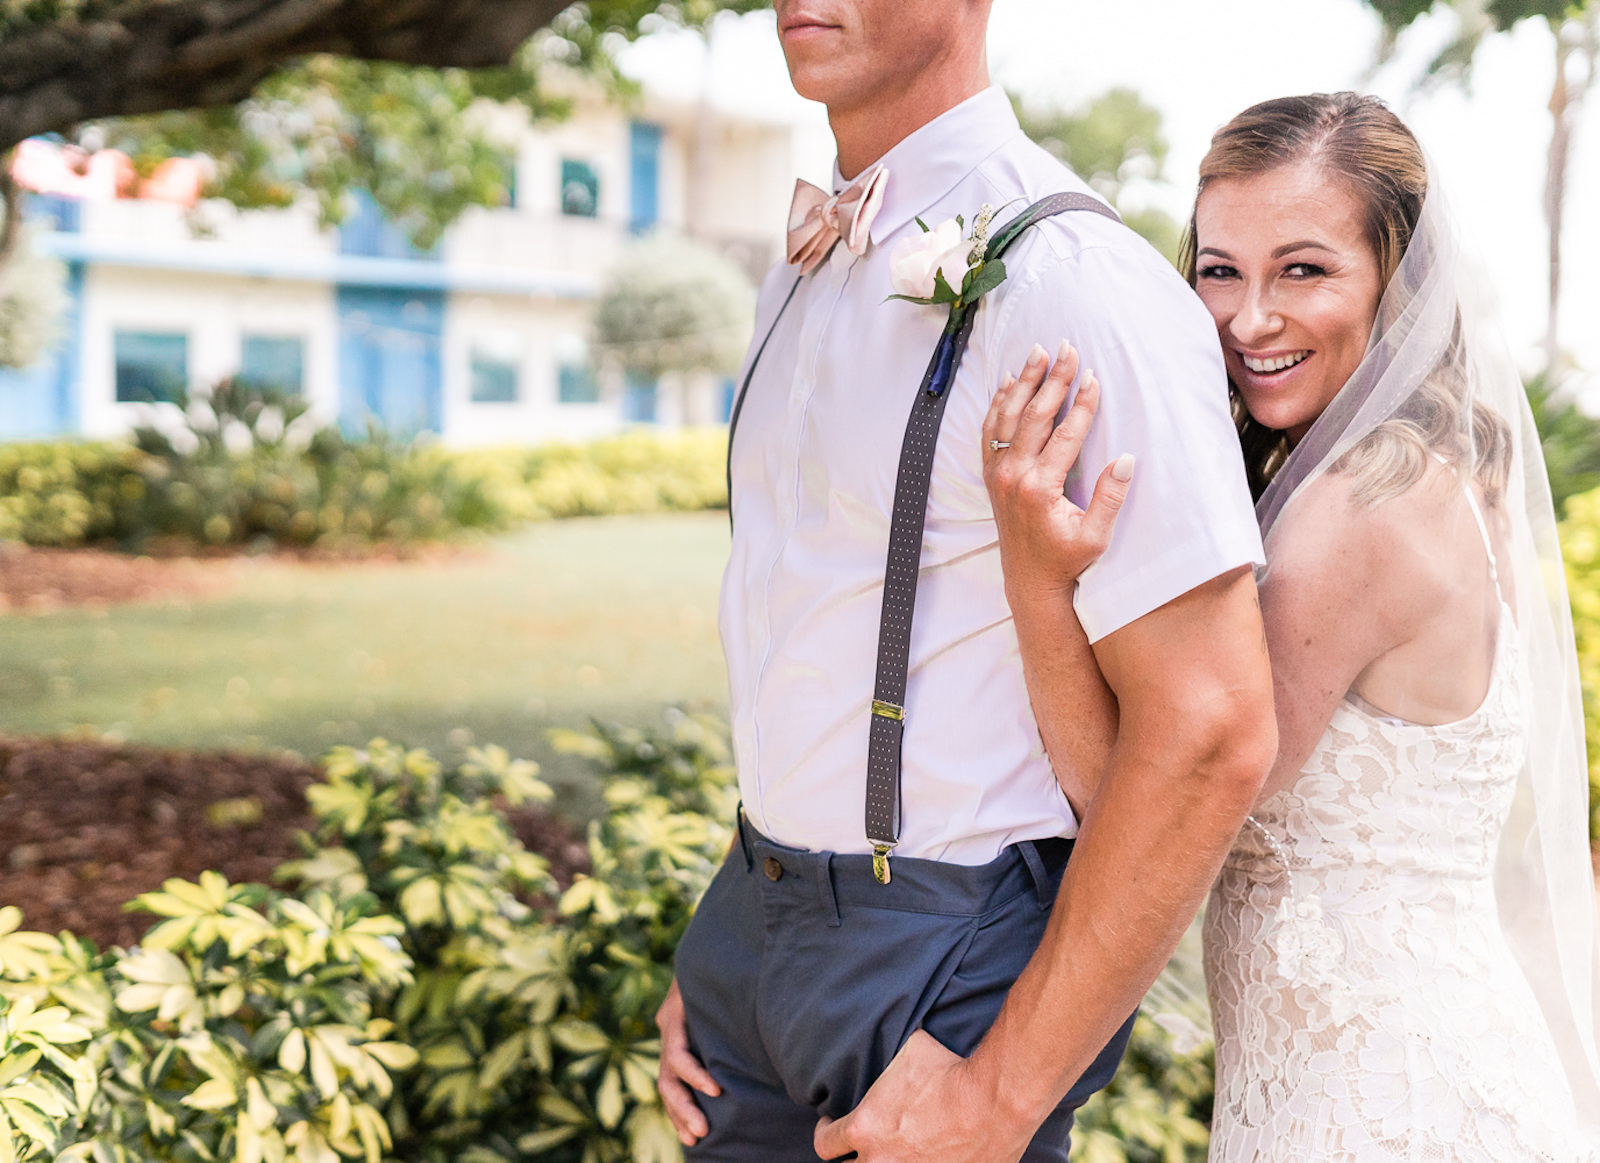 St. Petersburg Florida Wedding | Outdoor Bride and Groom Portrait at Wedding Venue Postcard Inn on the Beach | Groom Navy Blue Pants with White Short Sleeve Shirt and Suspenders and Flip Flops | Lace Sheath Spaghetti Strap V Neck Boho Bridal Gown Wedding Dress